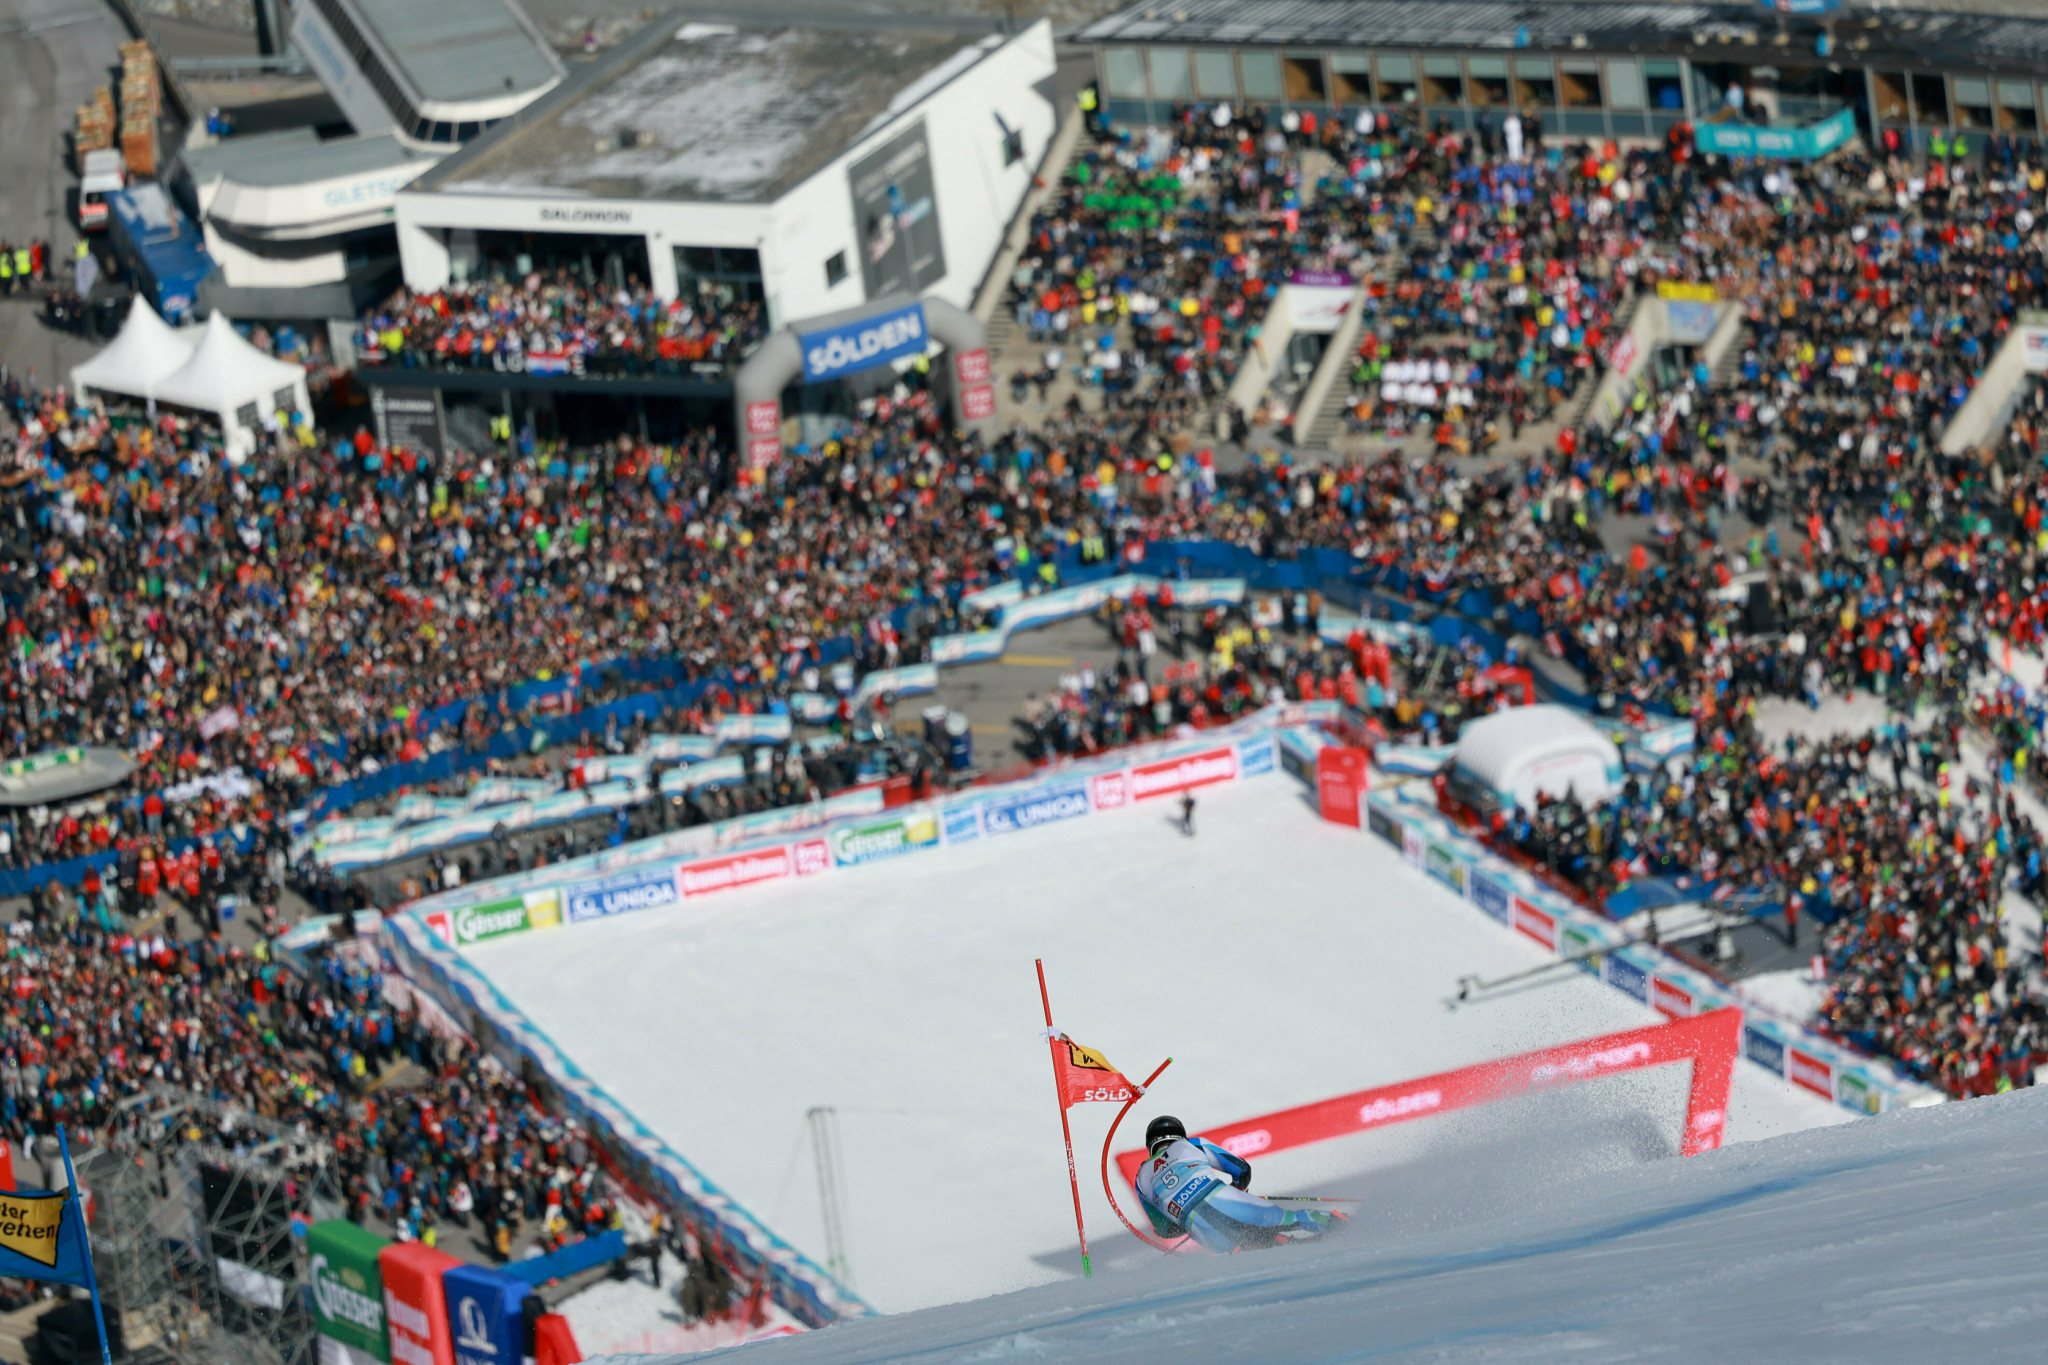 Sölden in Tyrol staged the opening Alpine Ski World Cup event of the season ©Getty Images